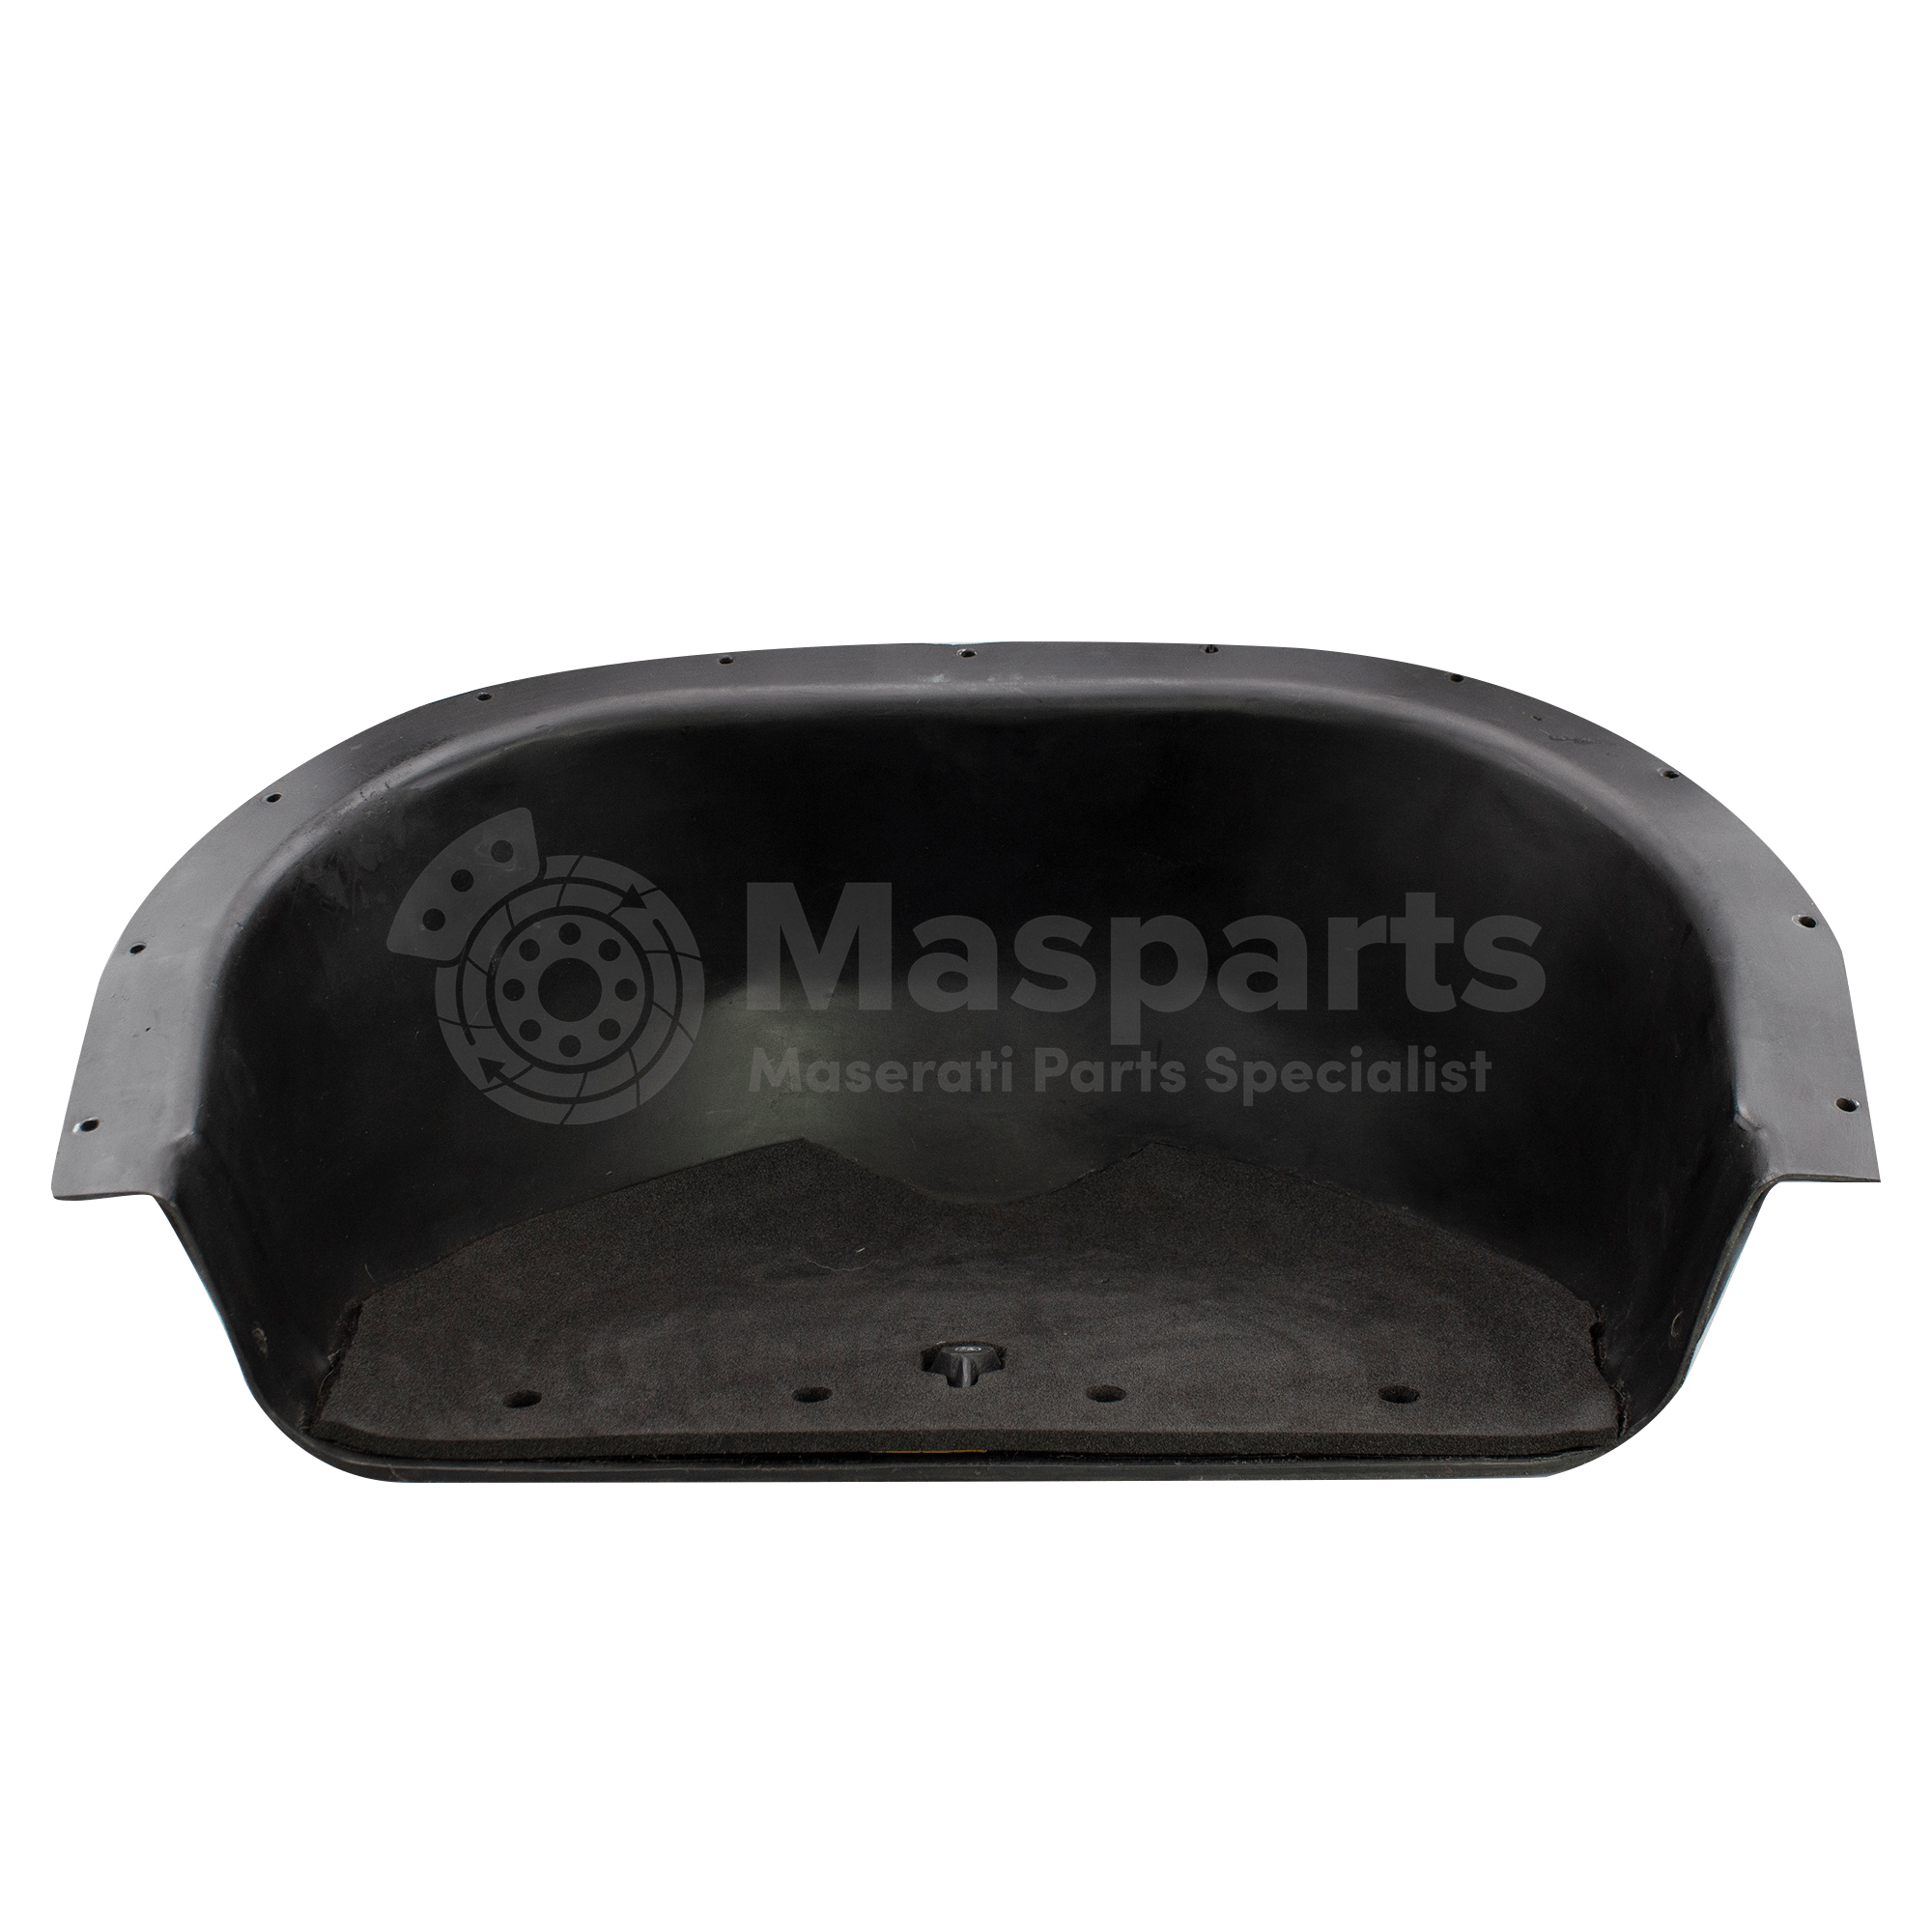 Maserati 4200 GT Complete Wheel Housing Used 67245900 (RP 66491000)